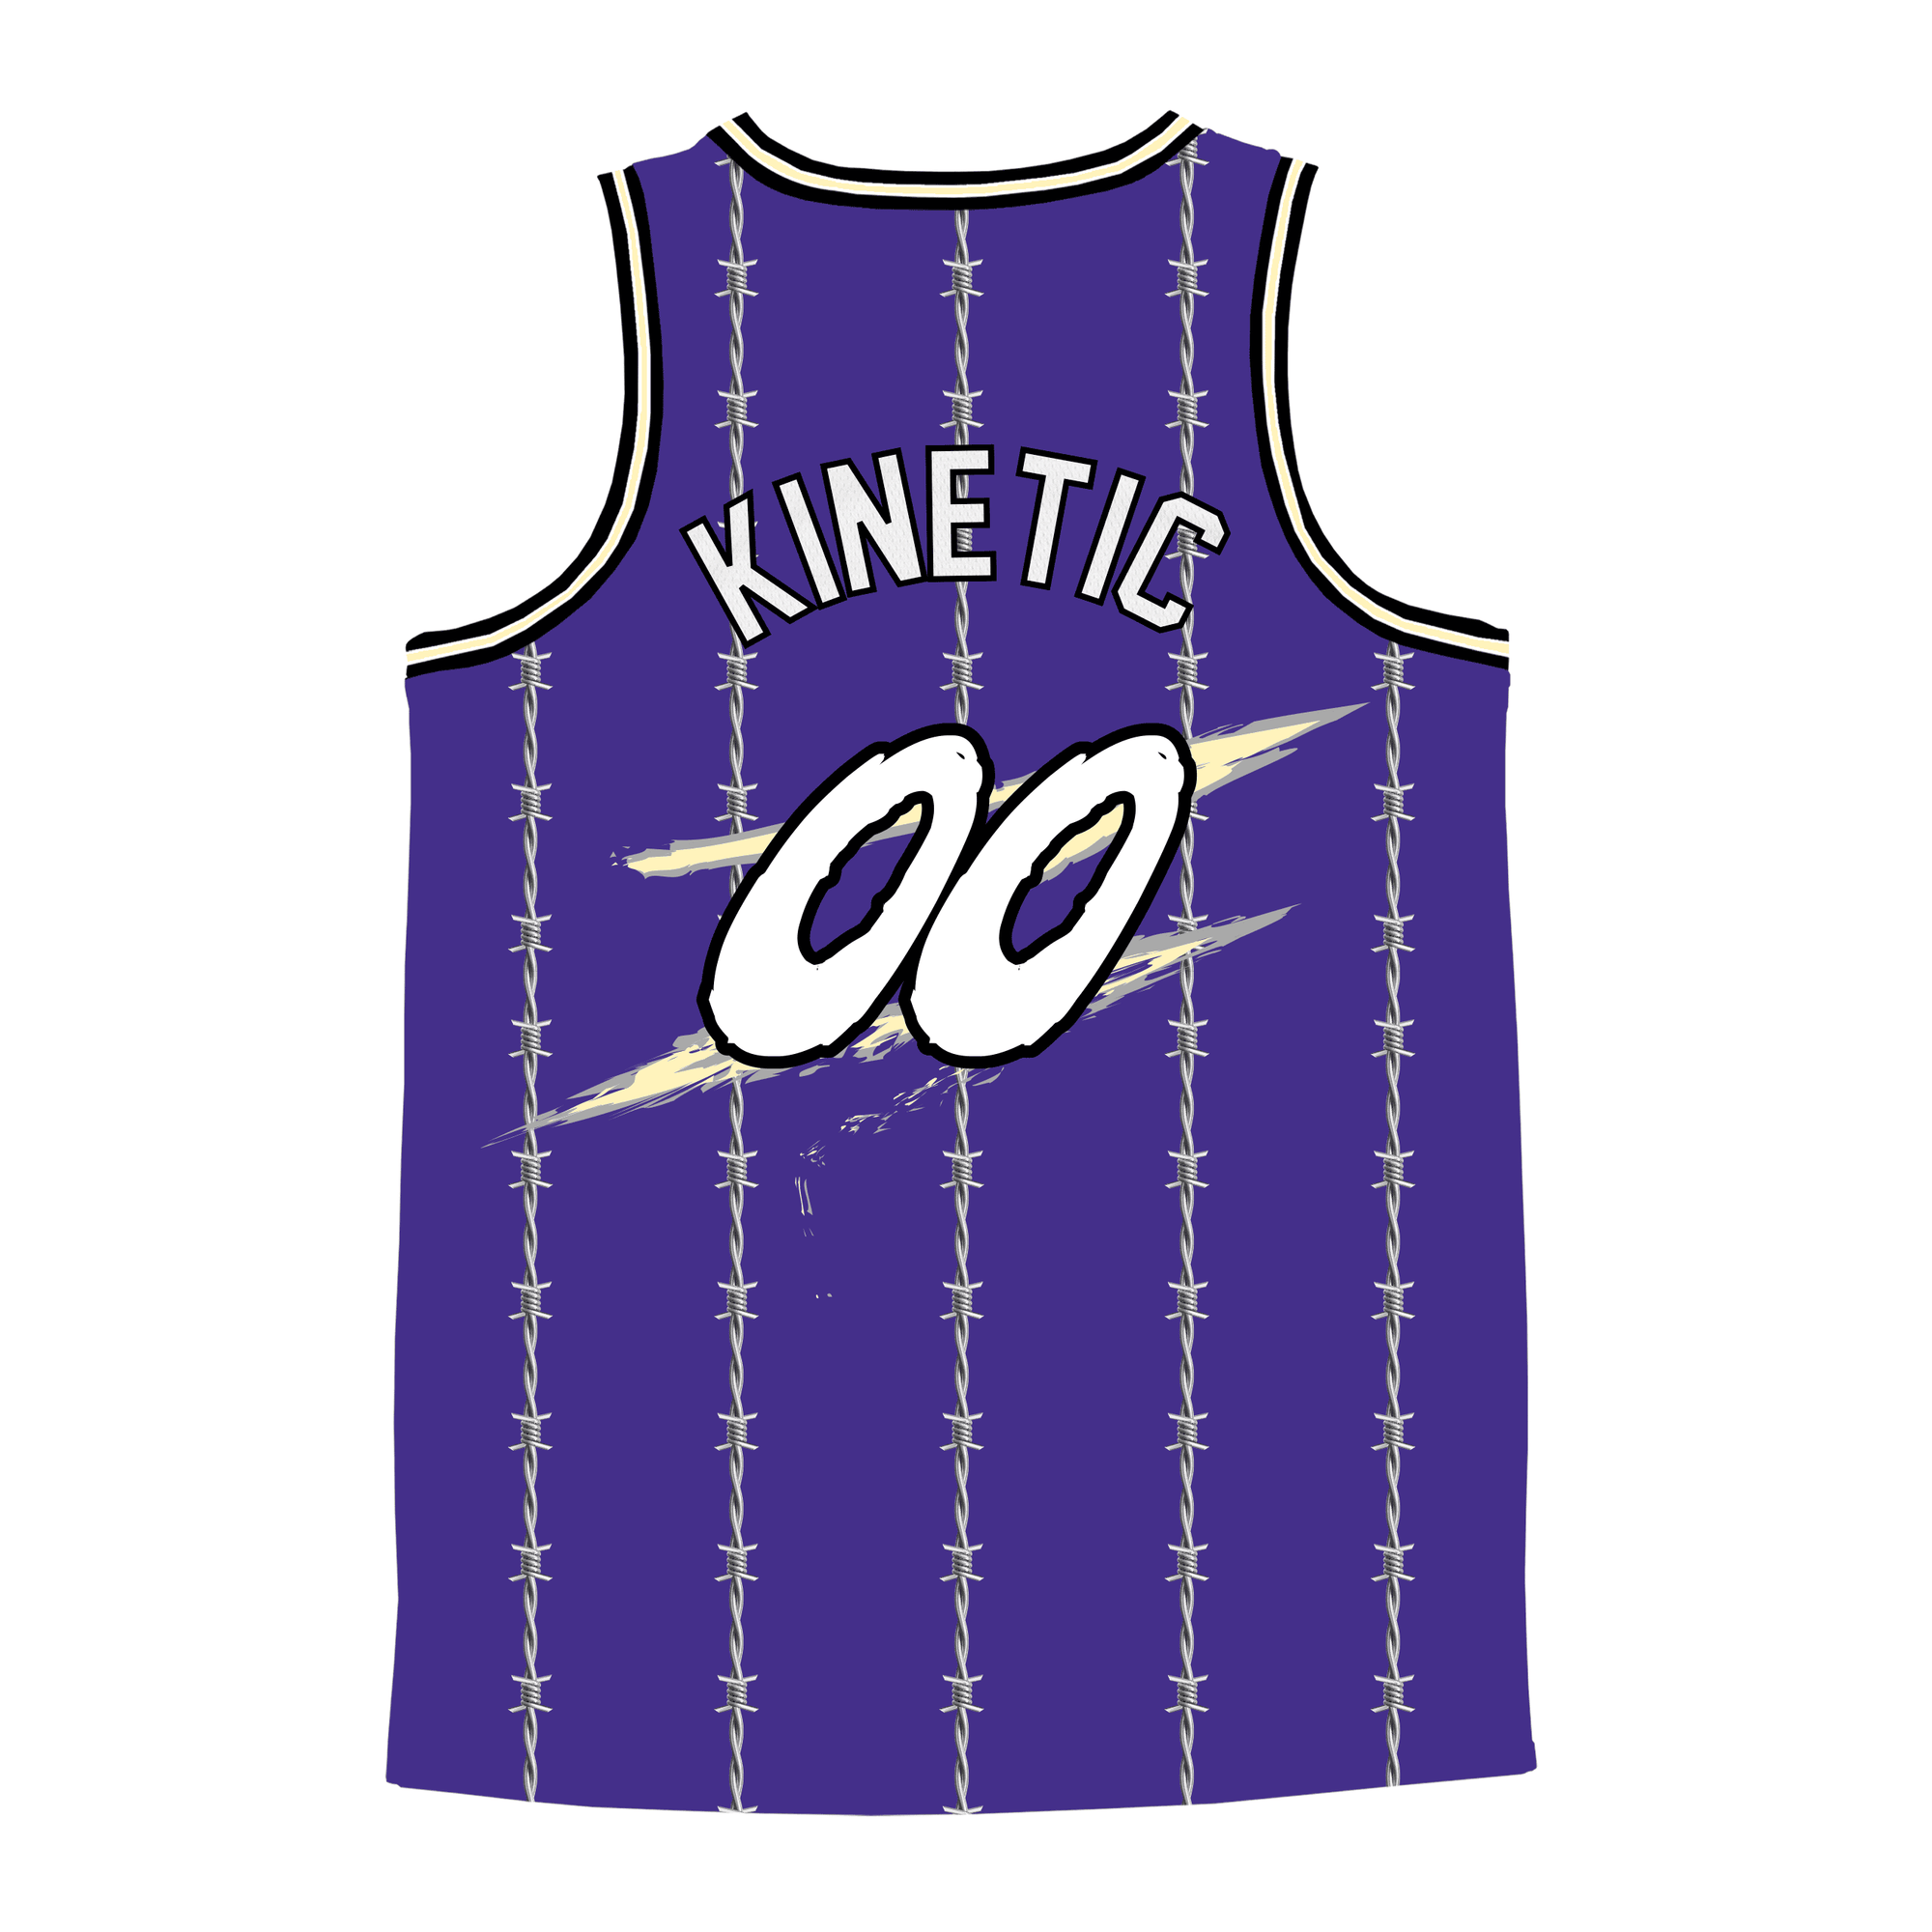 Sigma Pi - Barbed Wire Basketball Jersey